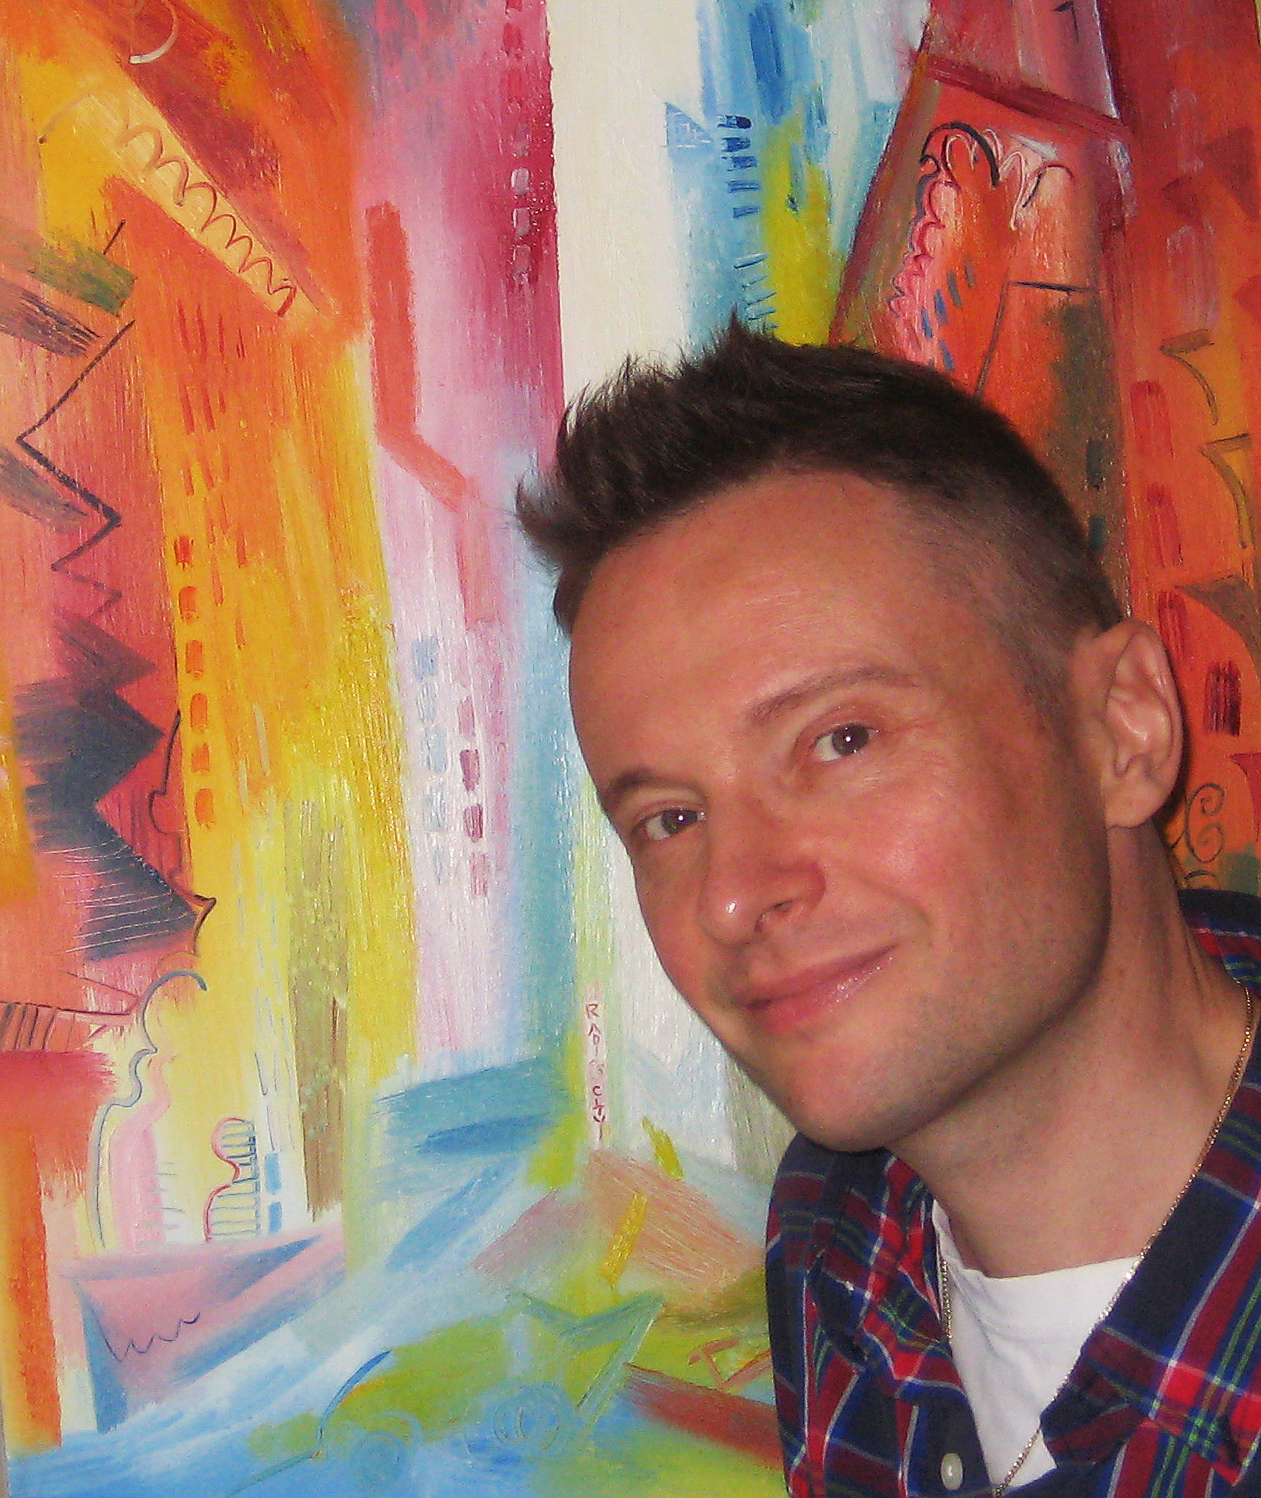 Stephen B. Whatley in 2013 with one of his works inspired by New York City